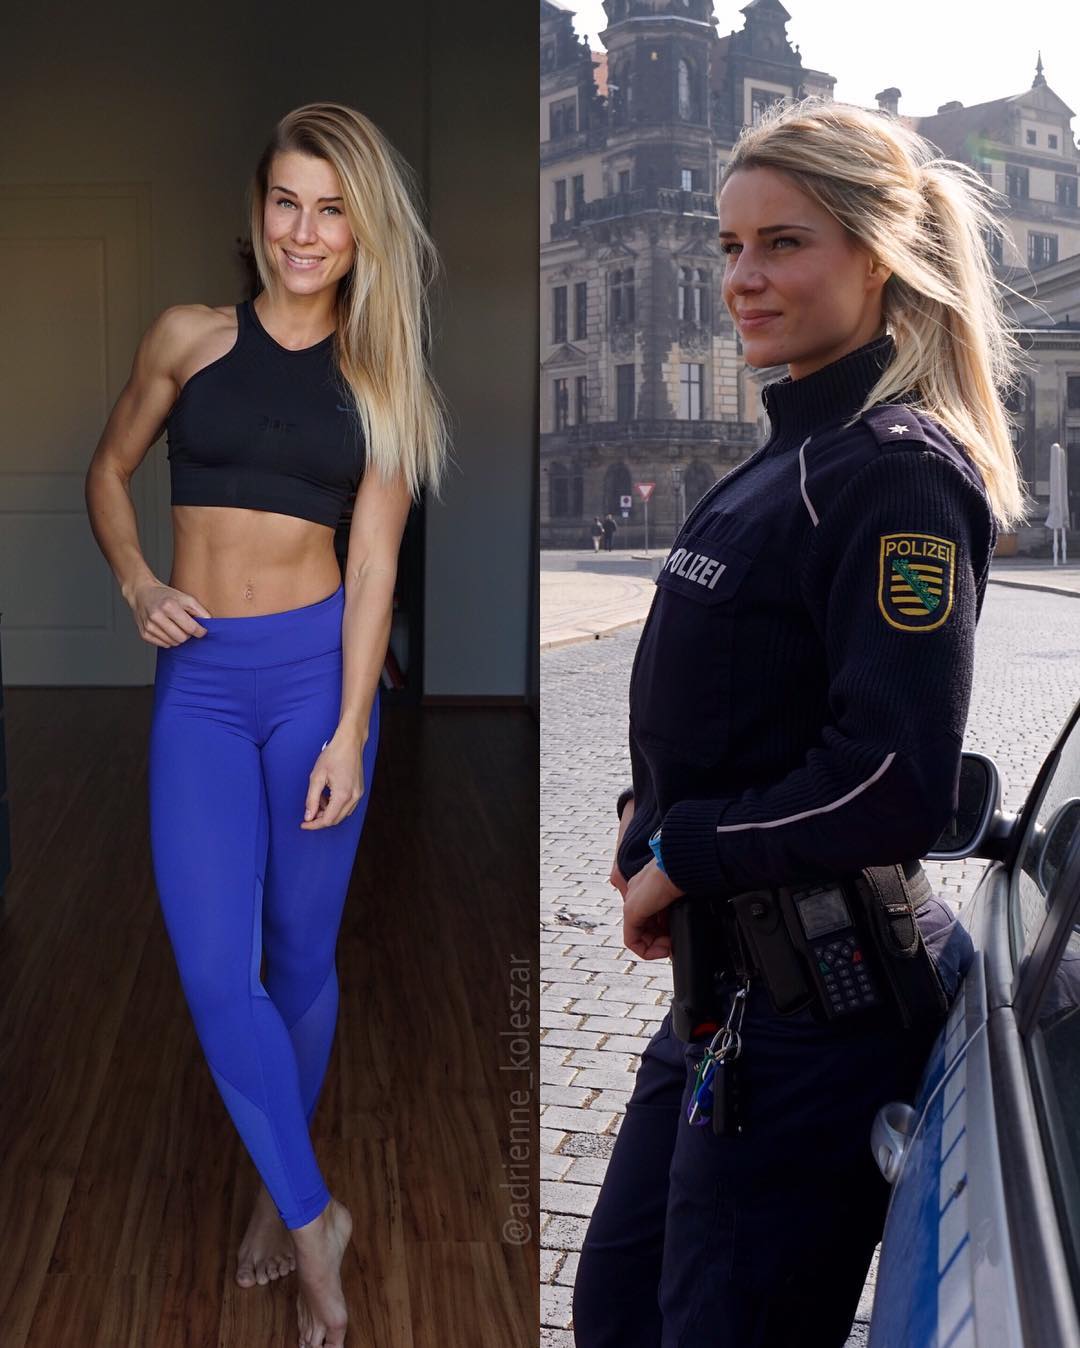 Photos Of World S Hottest Police Officer From Germany Reckon Talk